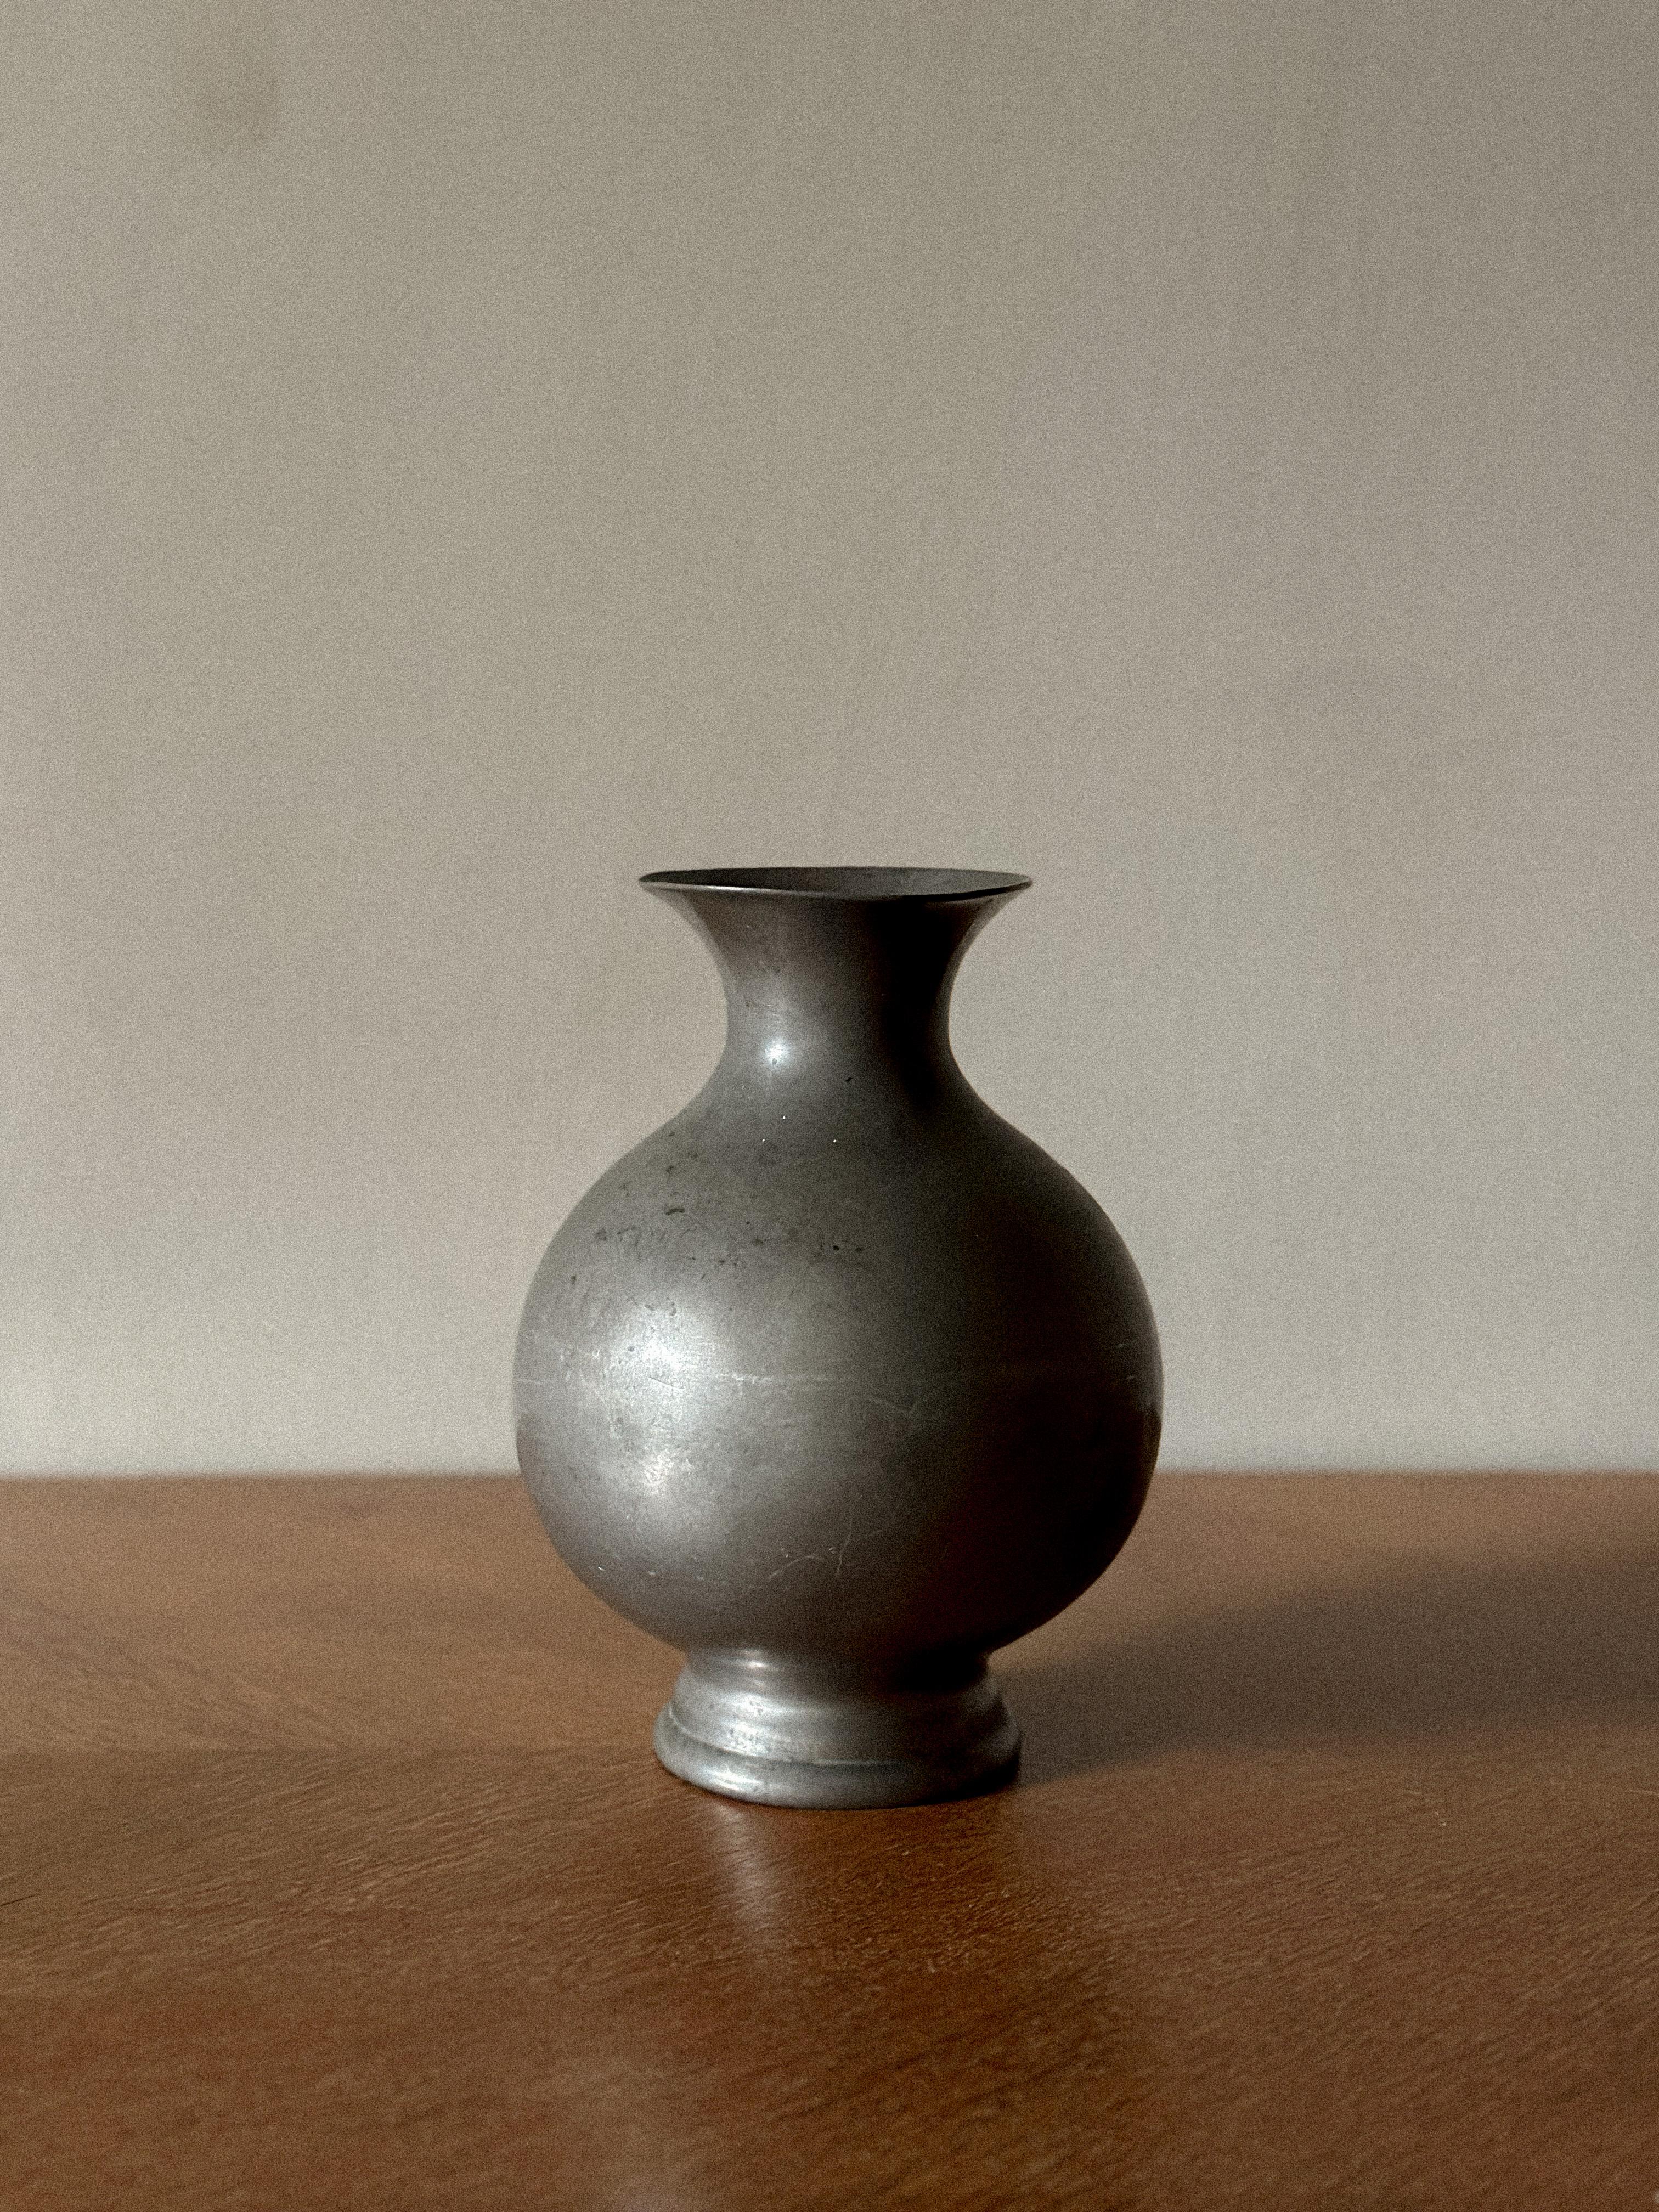 Firma Svenkt Tenn, a pewter vase, Stockholm 1934.
Stamped with angel mark, Stockholm H8. Height 20 cm
Wear due to age and use. Scratches. Rim chip